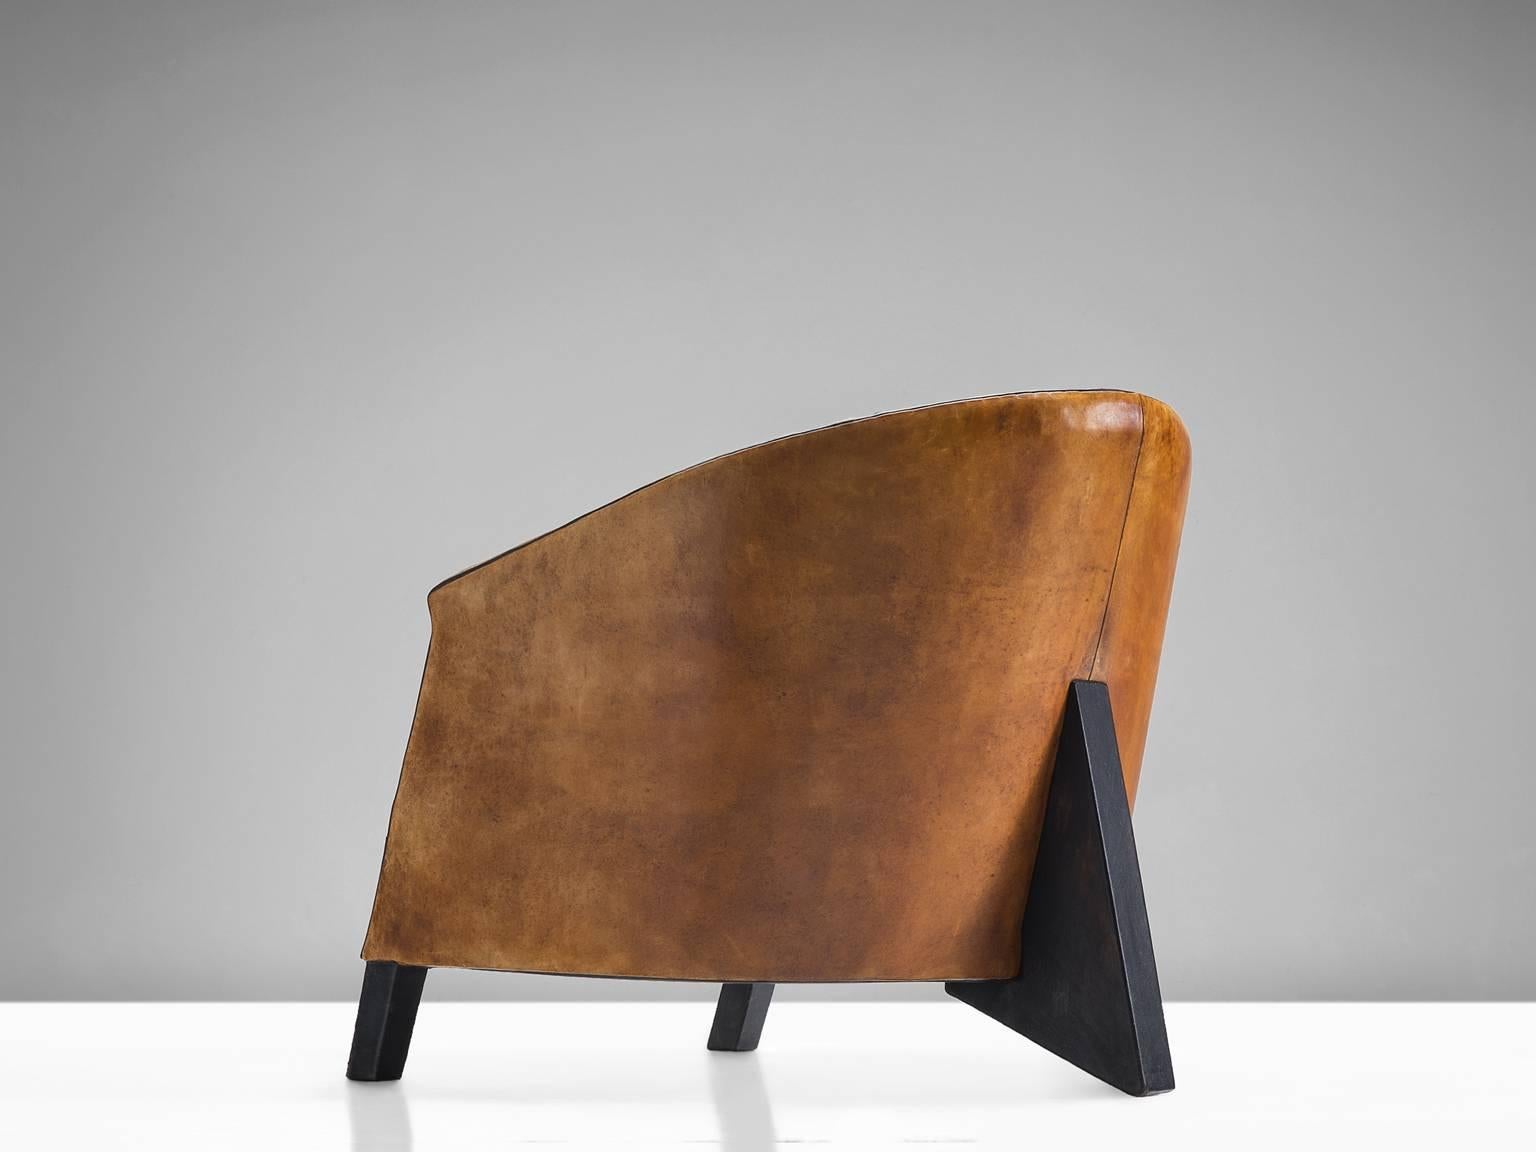 Cognac club chair, in leather and wood, Europe, 1970s.

This club chair in cognac leather with black piping has a very original and strong appearance. The sturdy design has an interesting playful base that provide the model with a certain lightness.